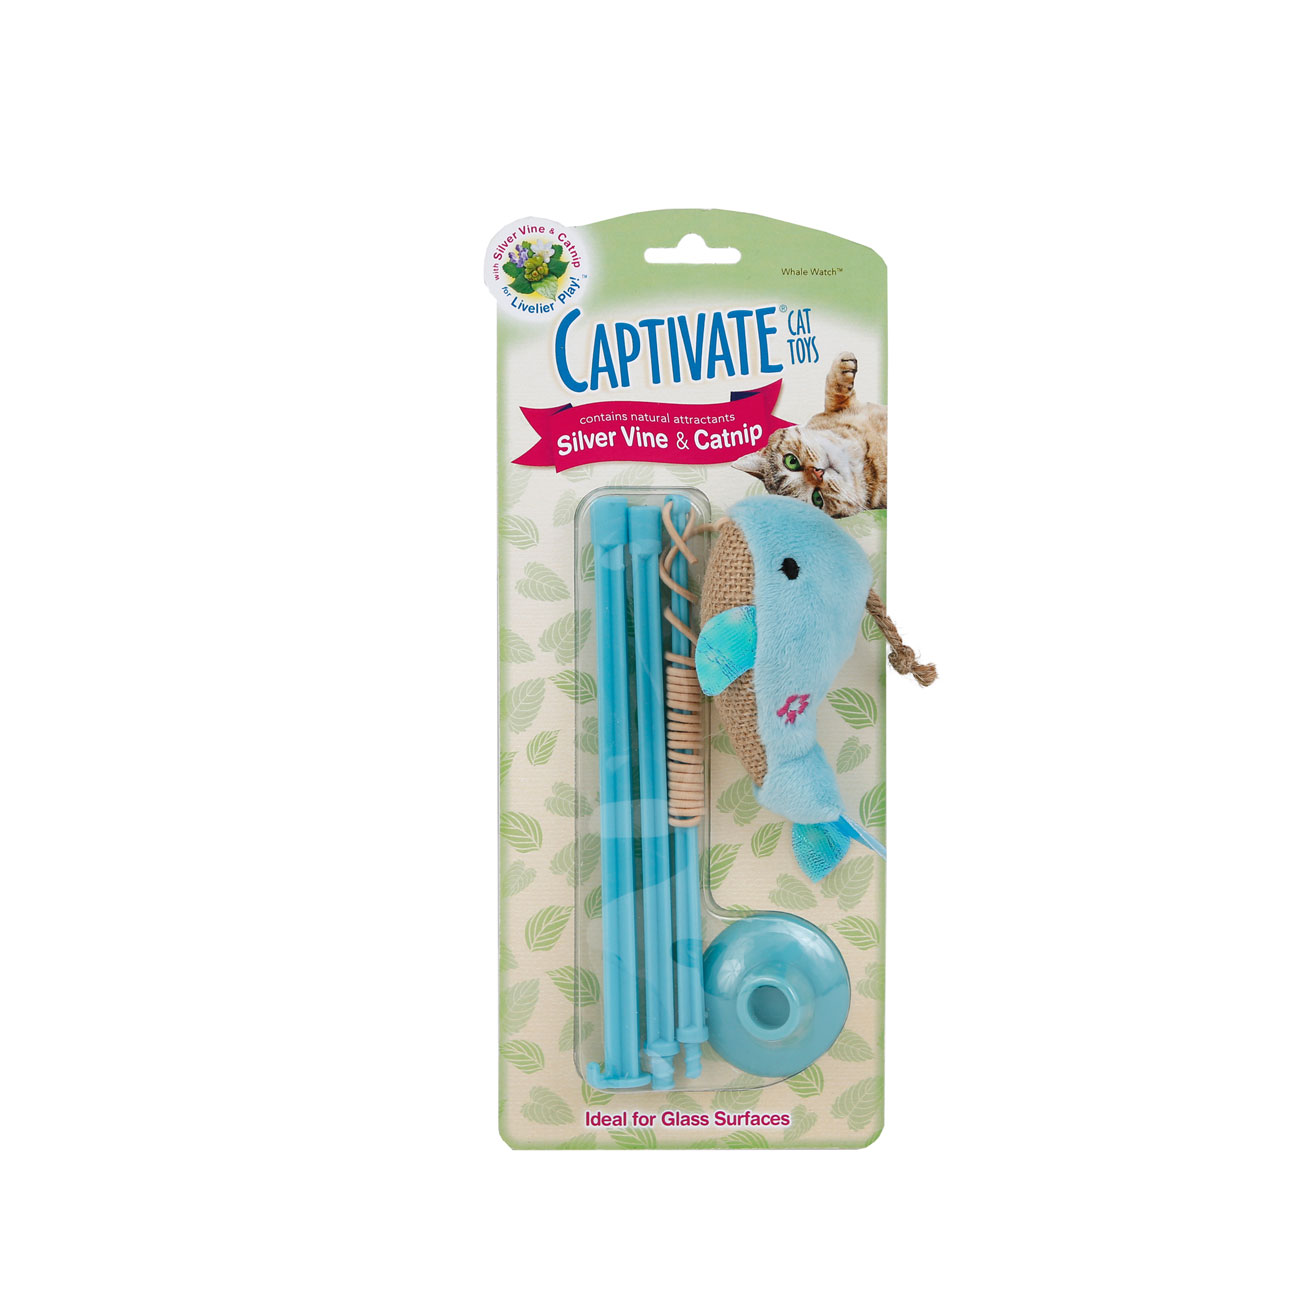 Hartz captivate Whale watch cat toy. High quality cat toy. Front of package. Hartz SKU#3270011262